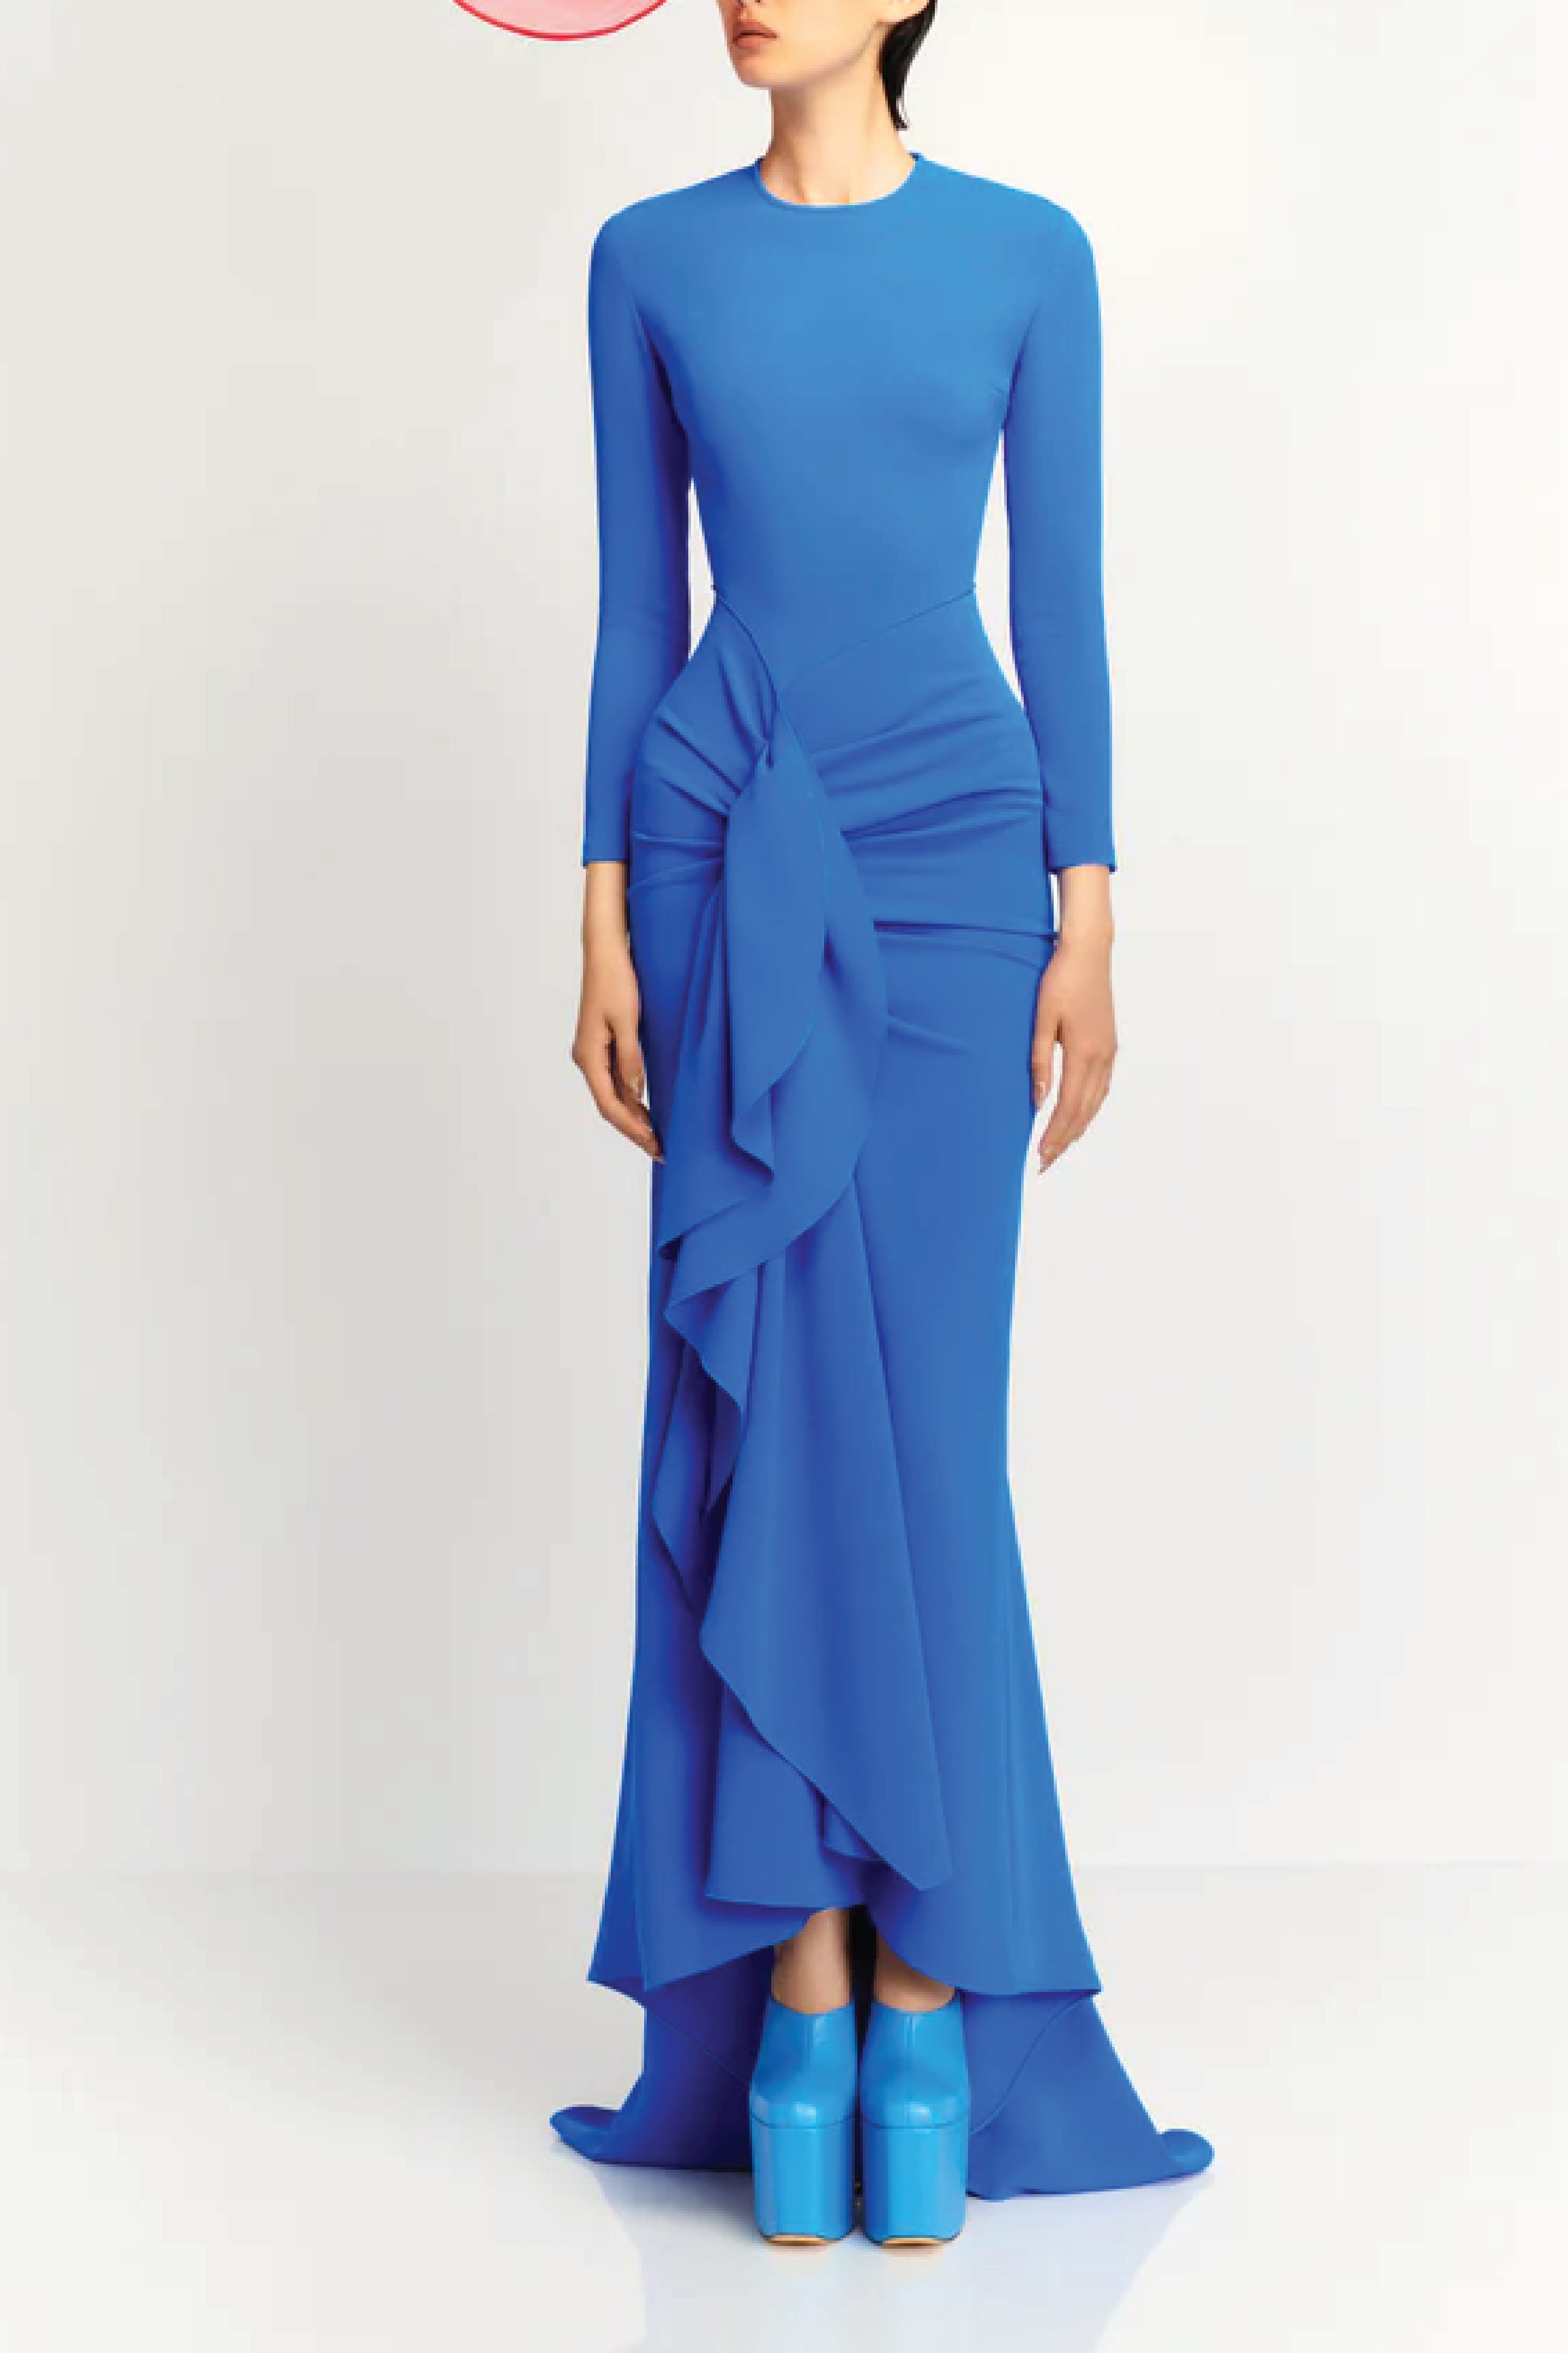 Nia Maxi Dress by Solace London